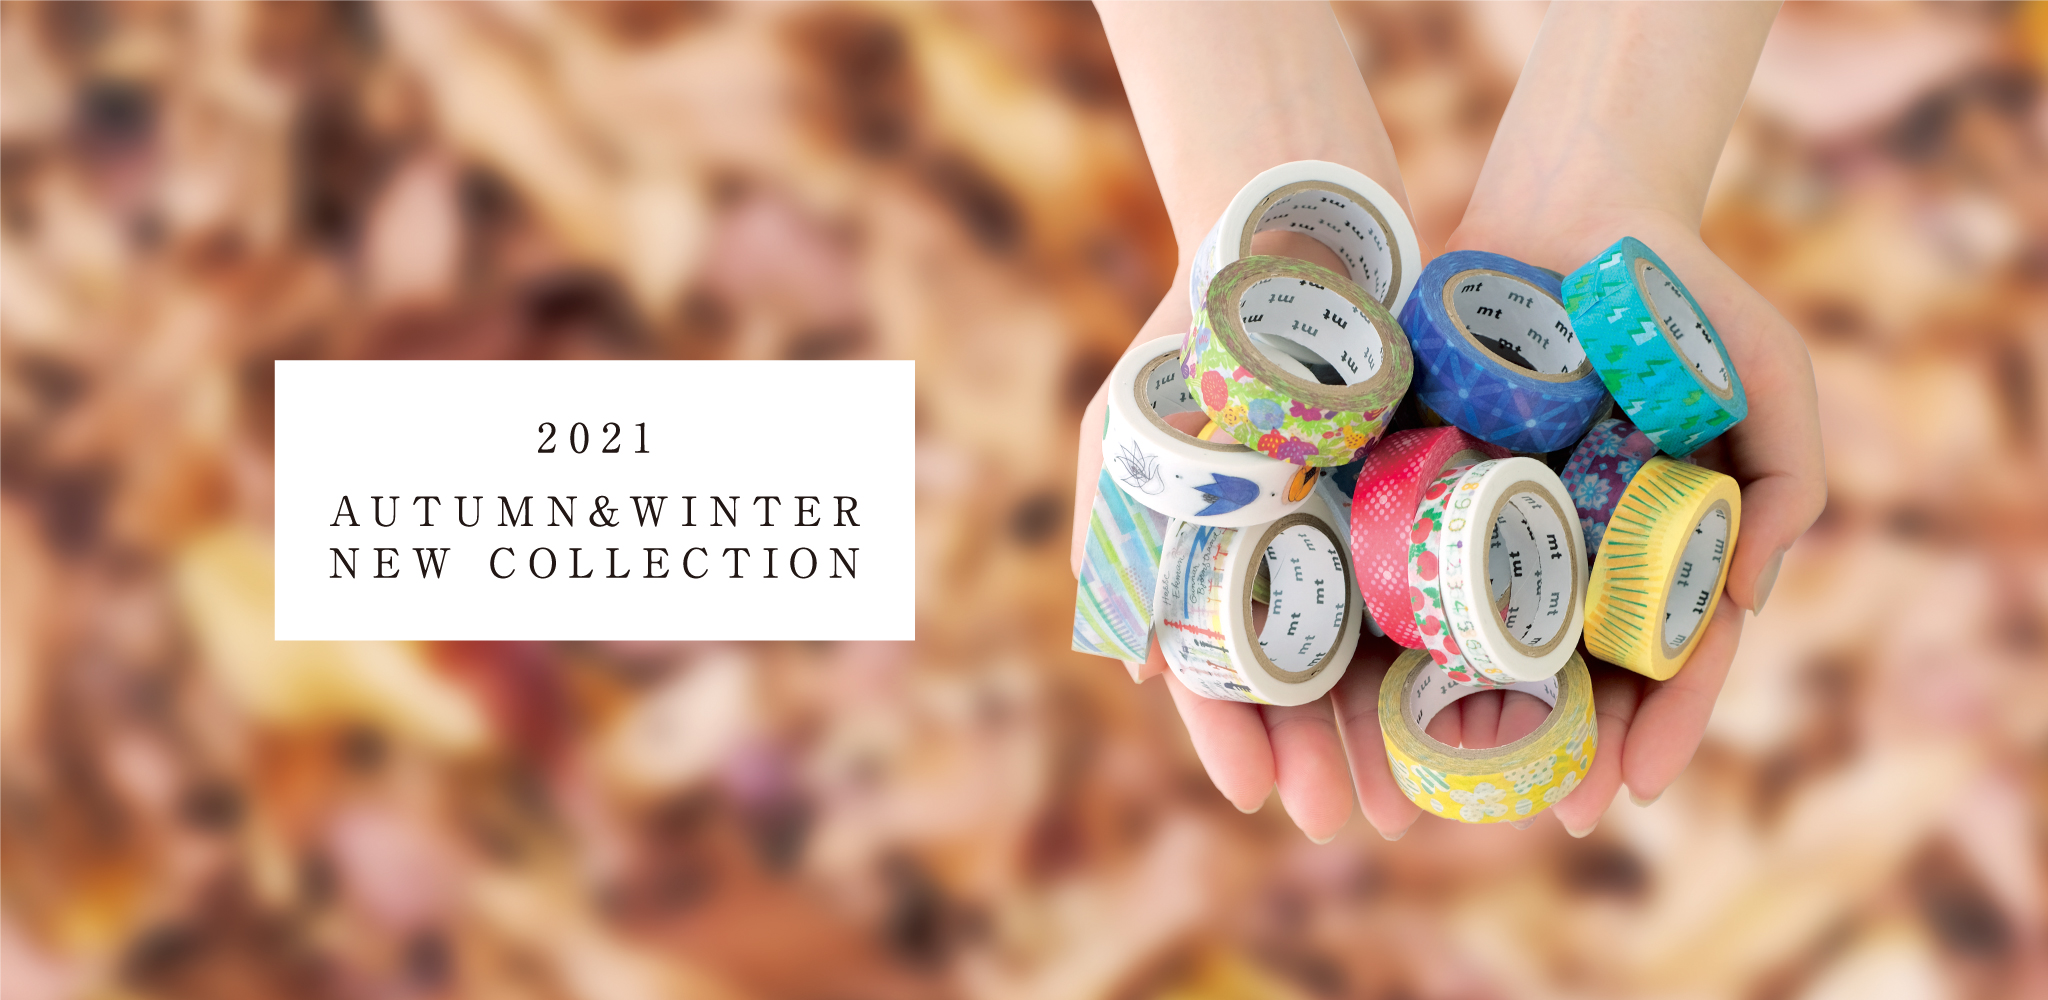 2021 AUTUMN&WINTER NEW COLLECTION